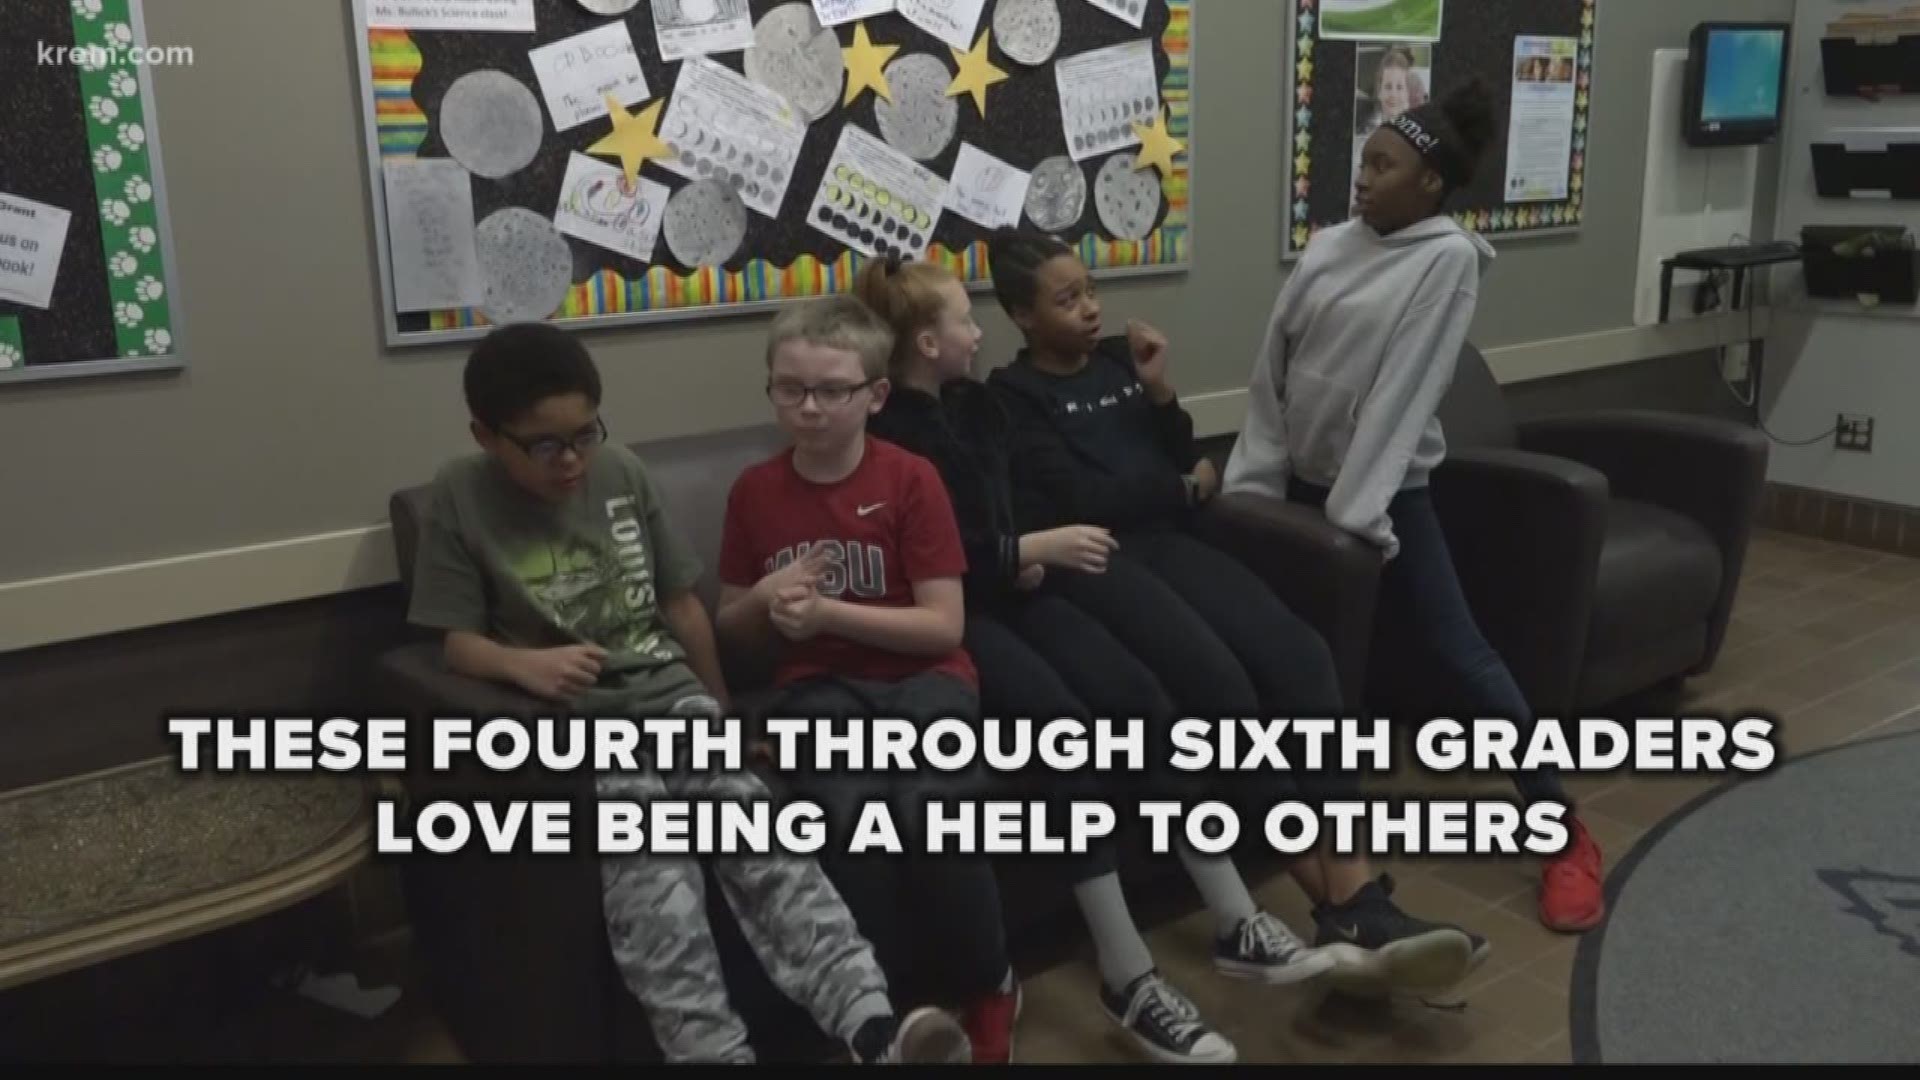 Grant Elementary School recently created a "Kindness Club." Members commit random acts of kindness around school.